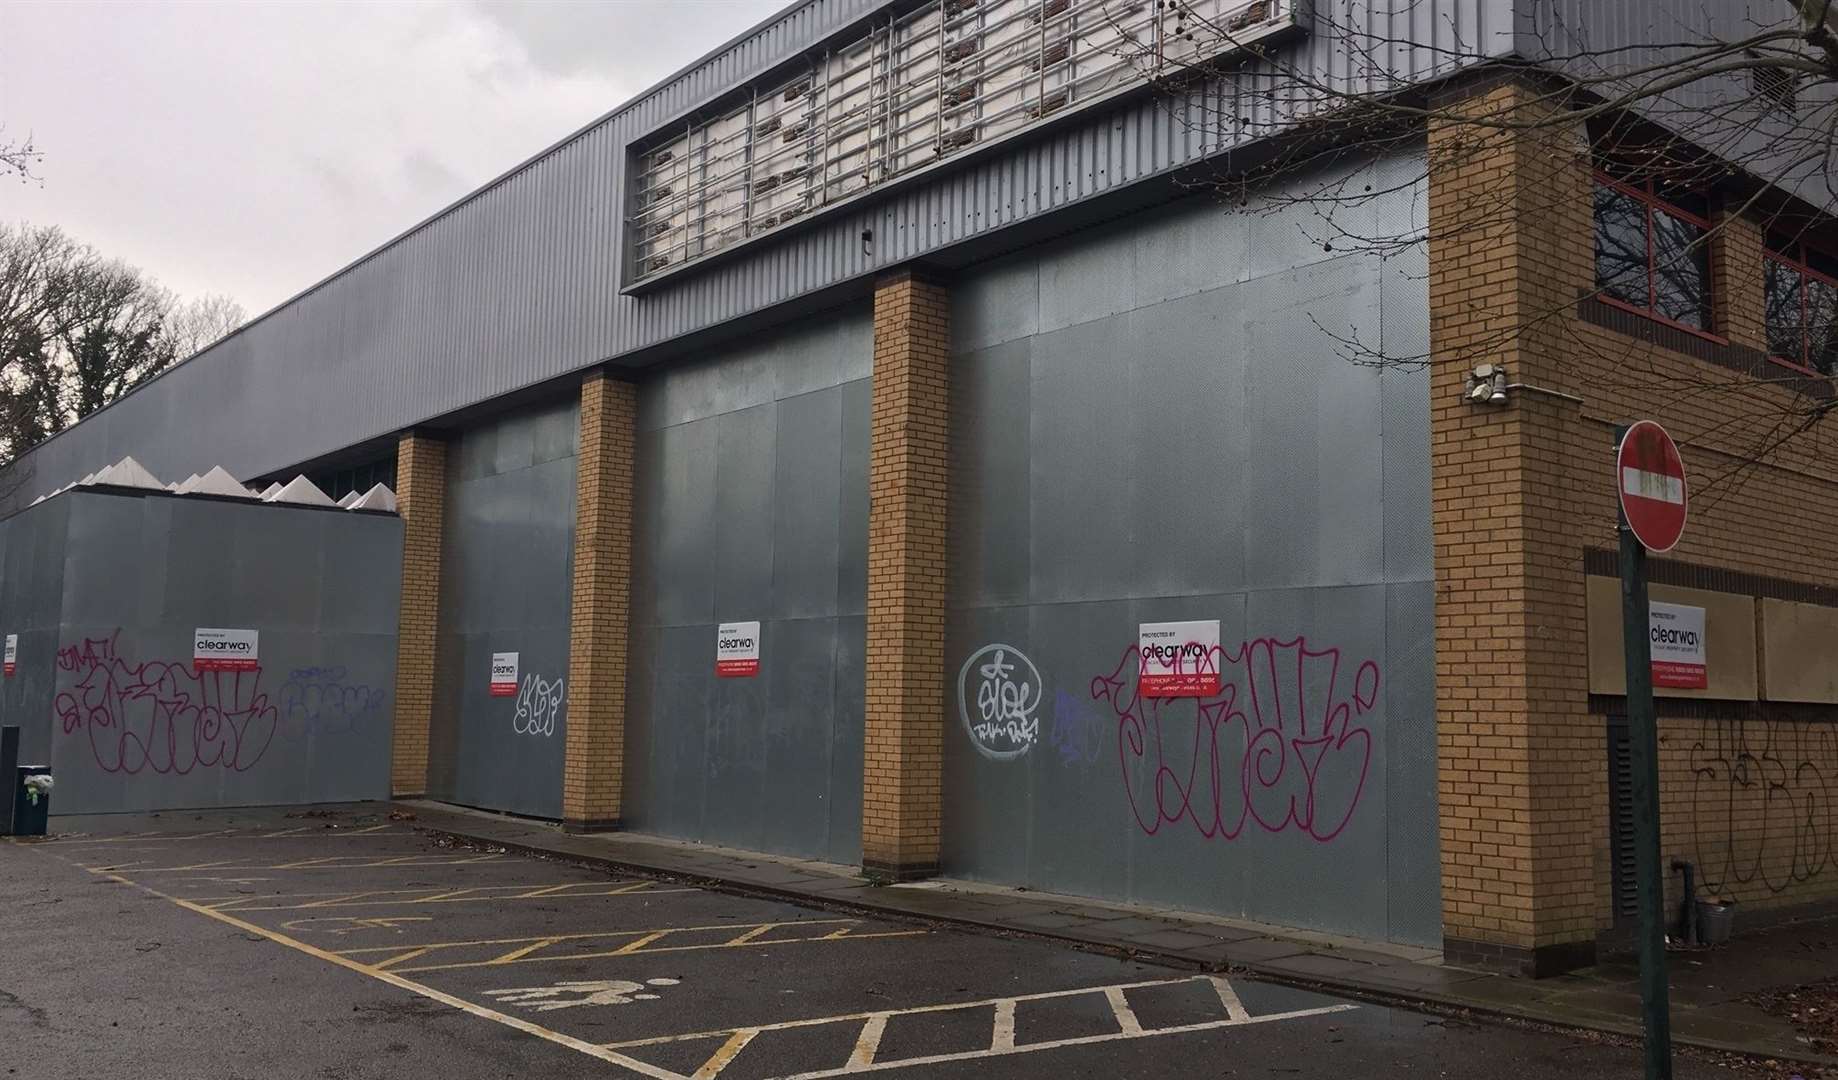 Wickes will take on the former Homebase store, which has stood empty for more than a year-and-a-half